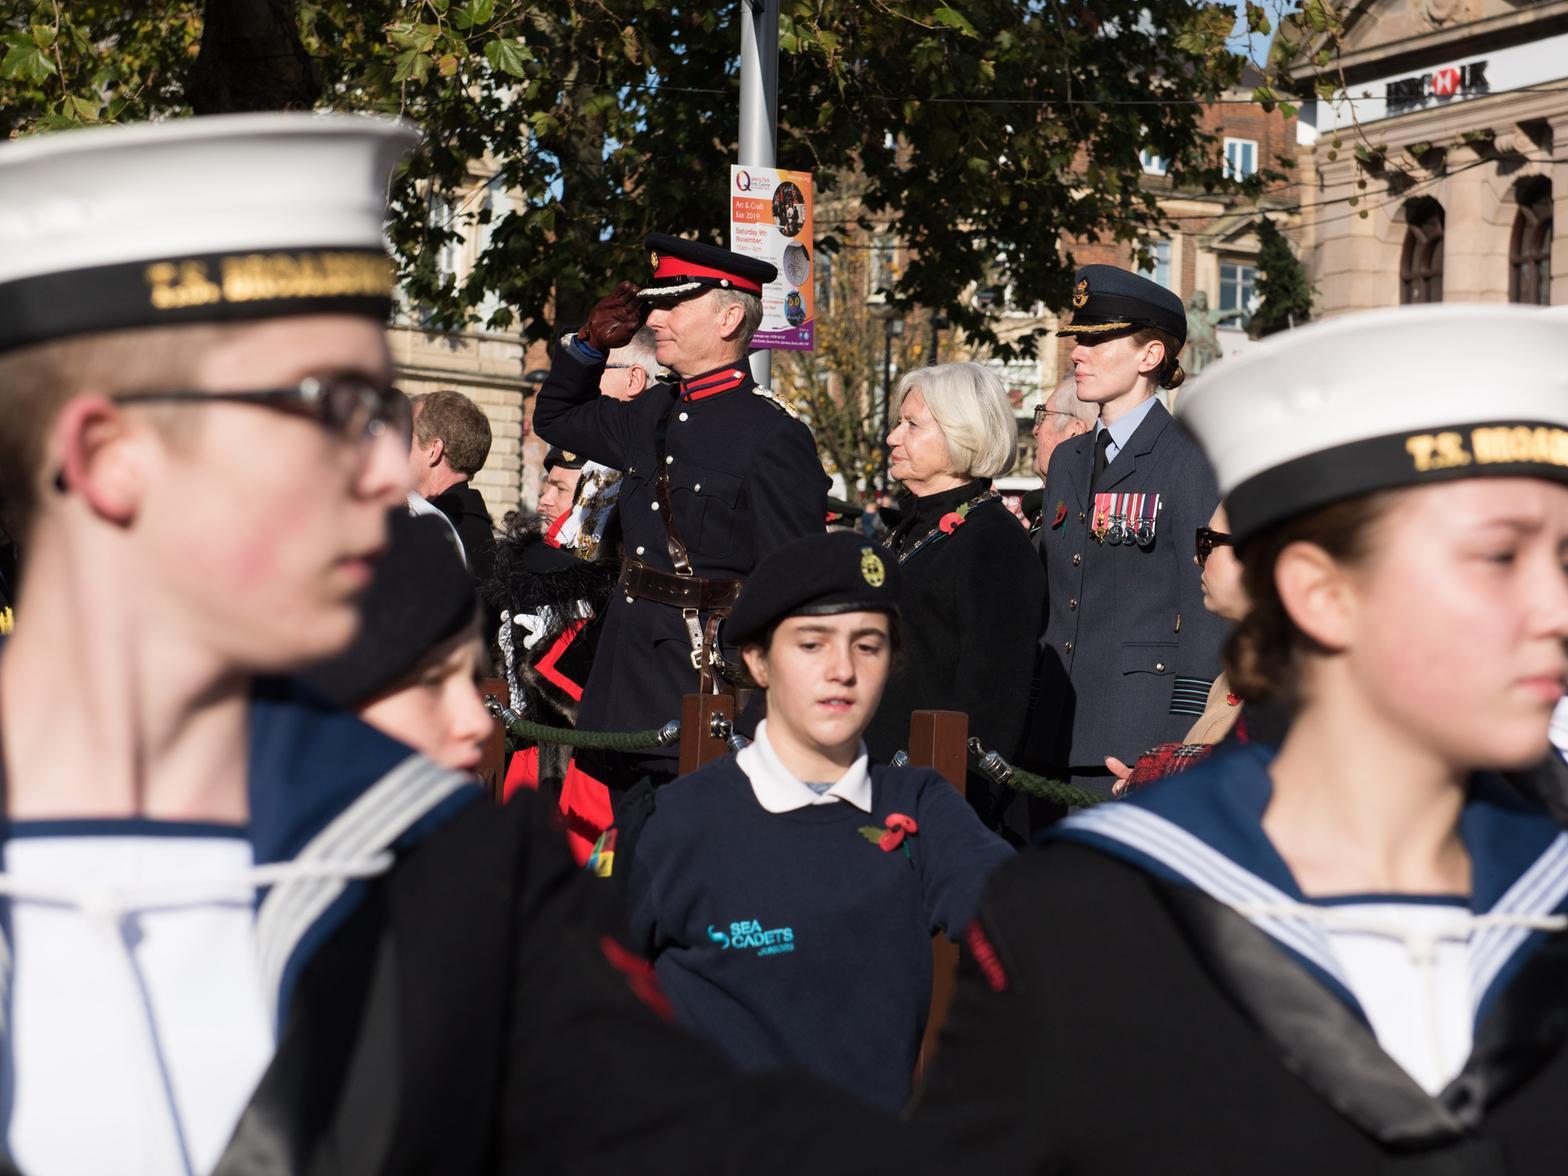 For more images from the Remembrance Day ceremony pick up a copy of Wednesday's Bucks Herald